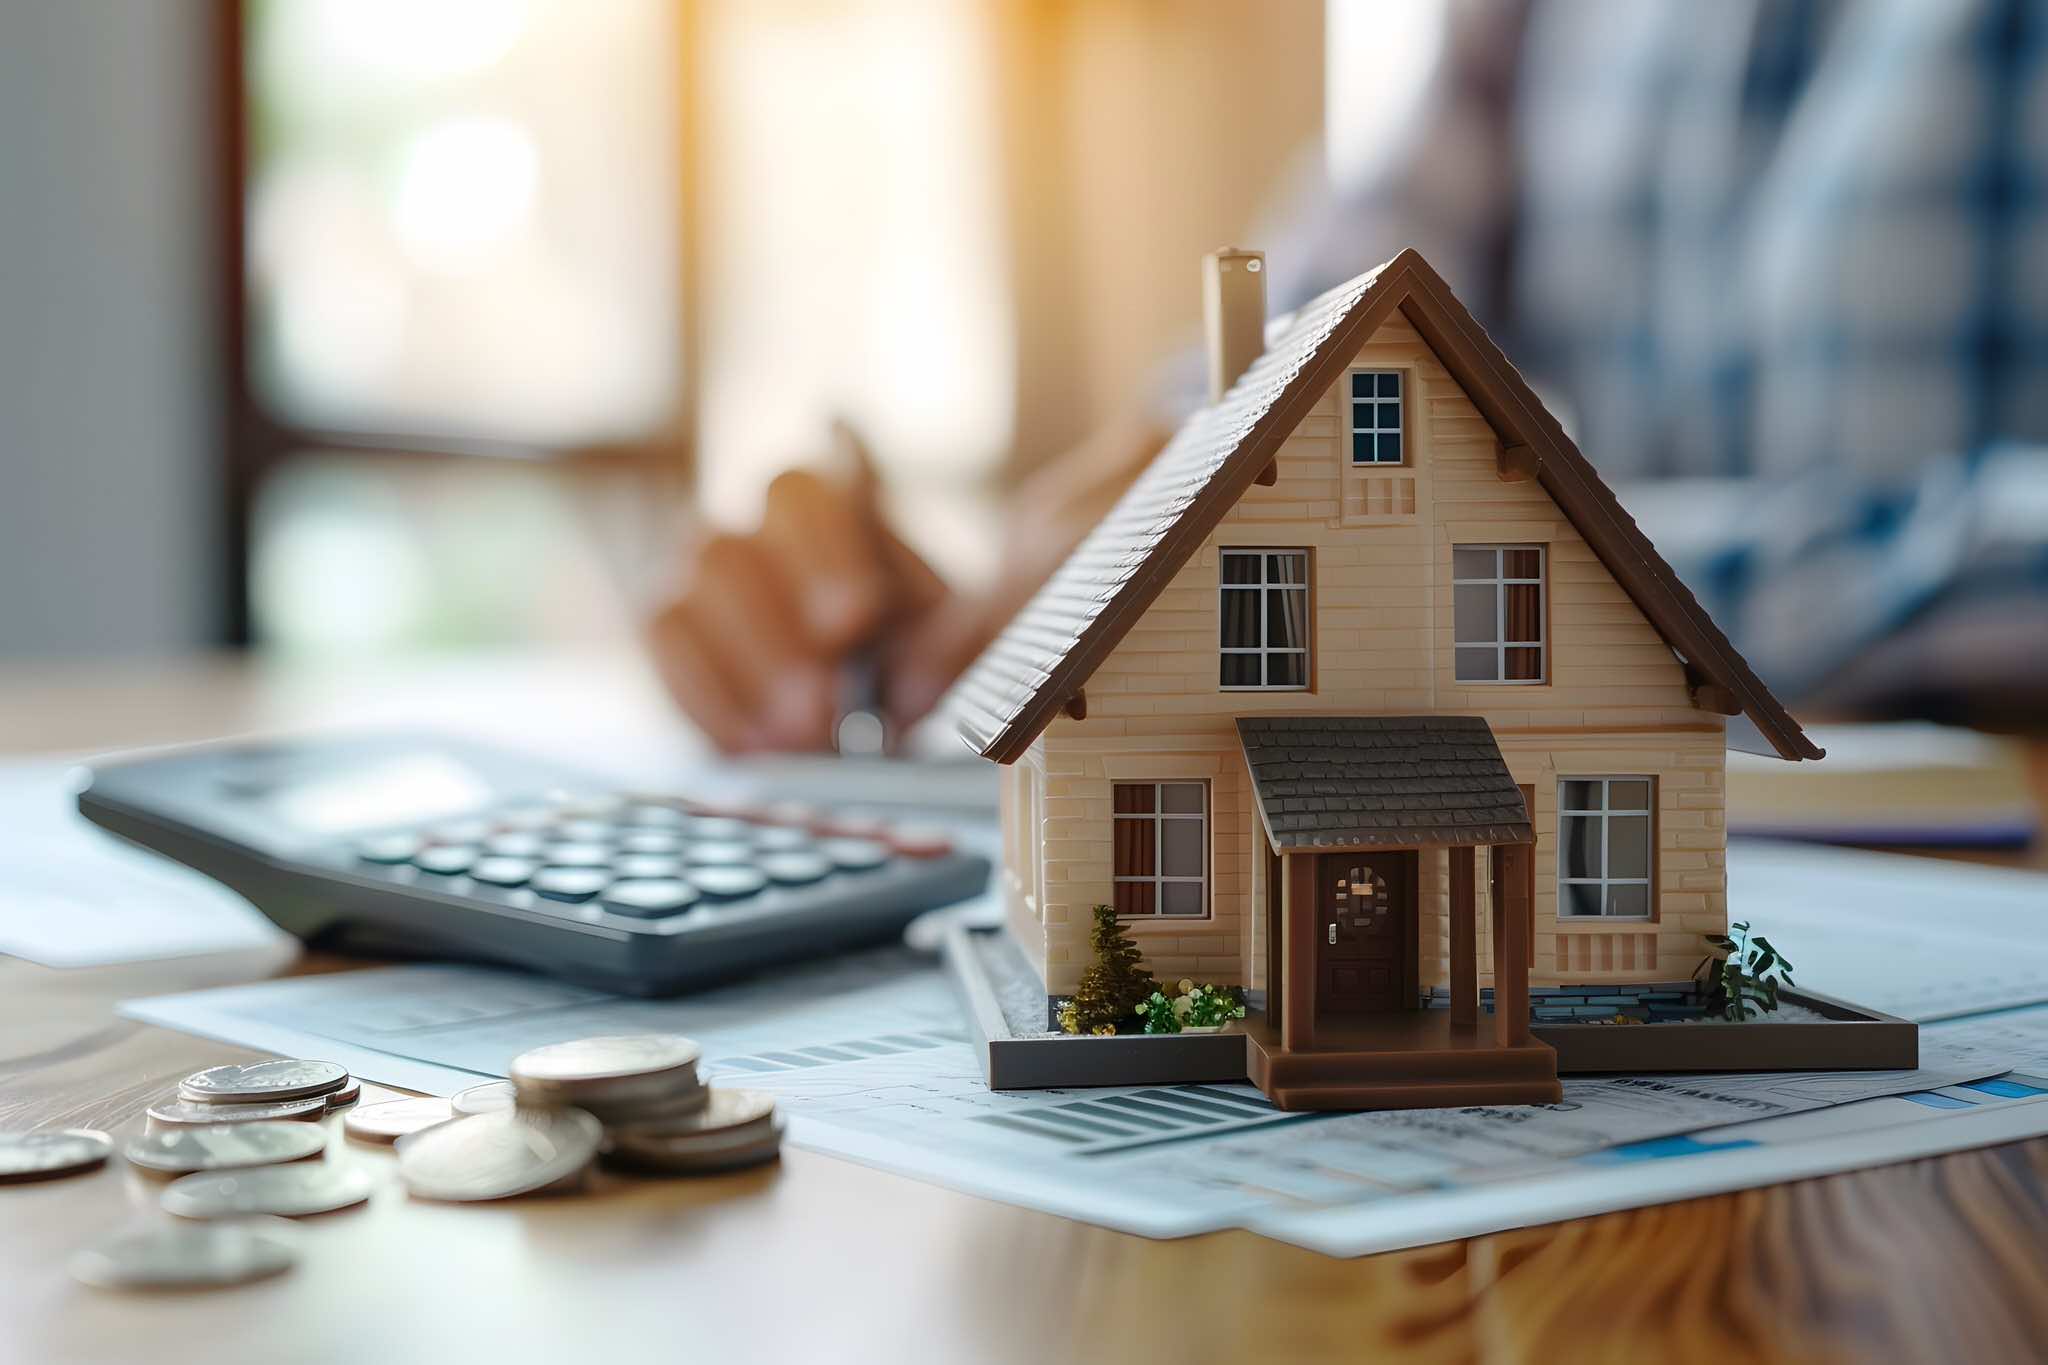 tiny figurine of house for sale next to calculator and mortgage papers